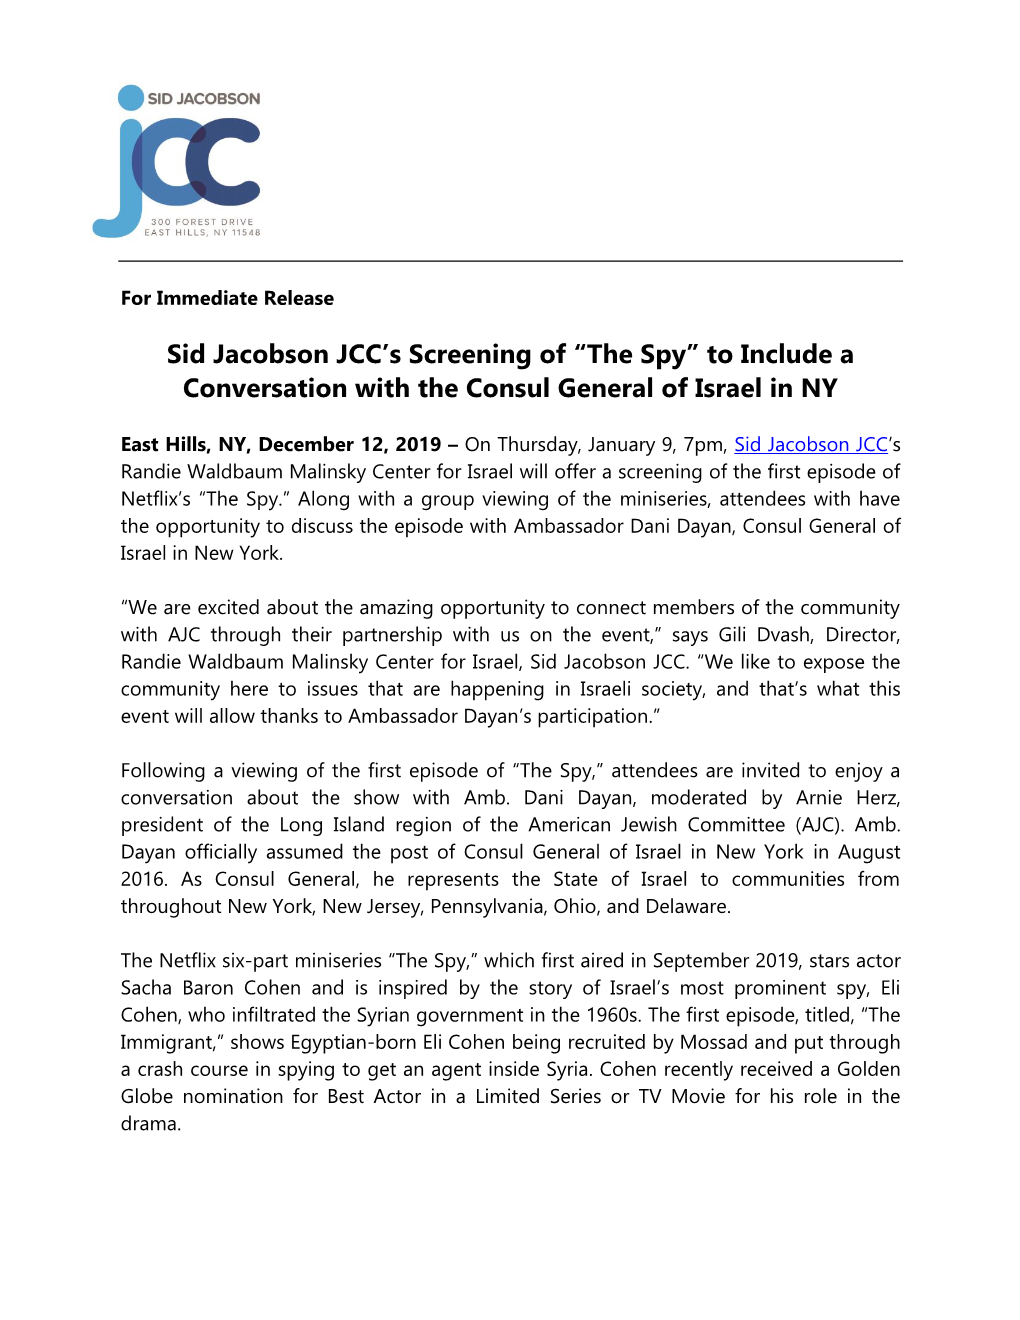 The Spy” to Include a Conversation with the Consul General of Israel in NY